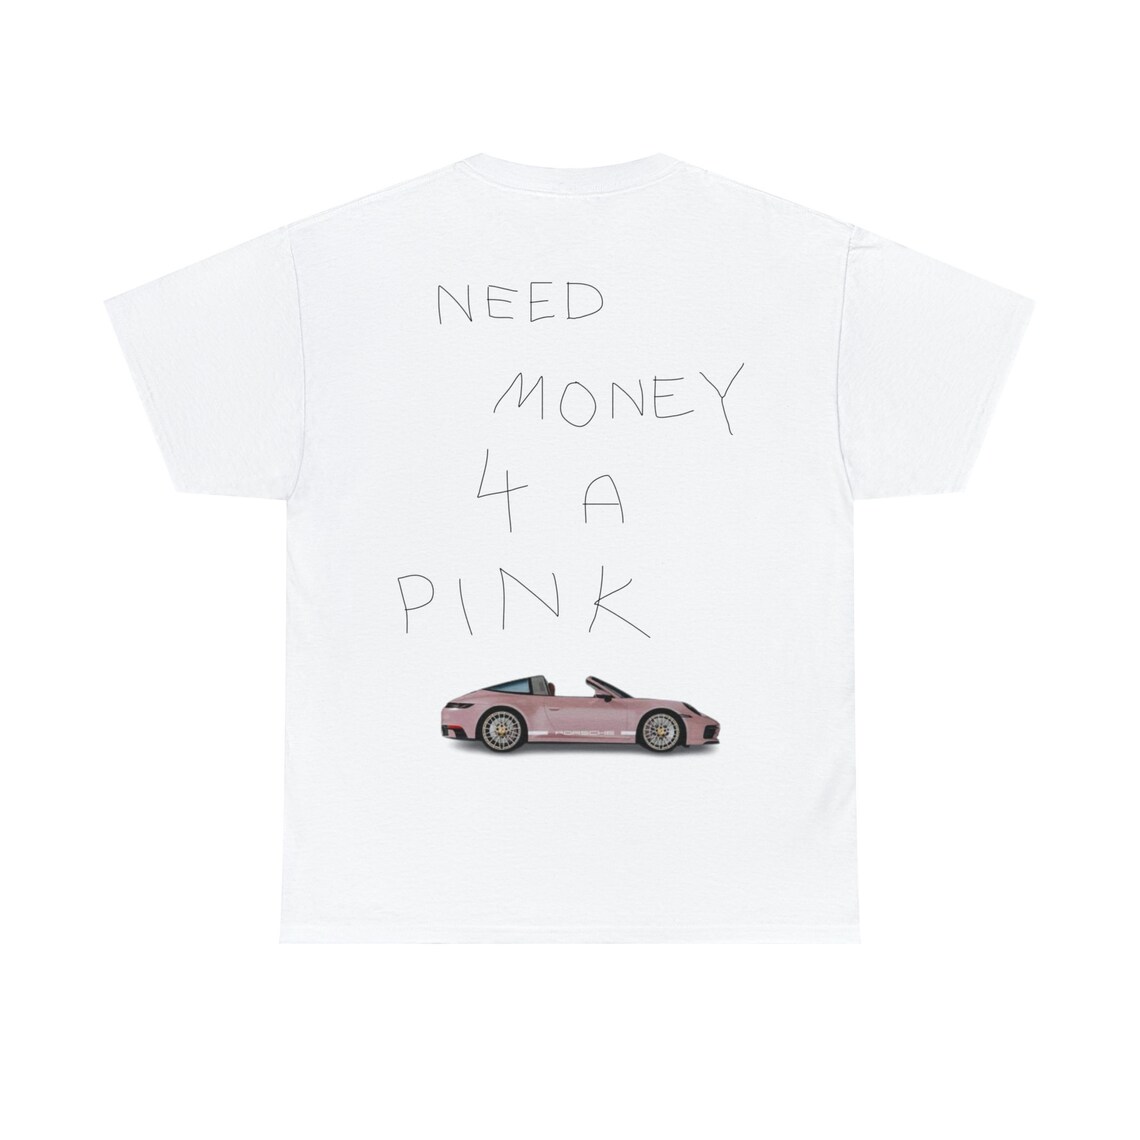 Need Money for A Pink Porsche Graphic Tee, Womens Clothing, Shirts With ...